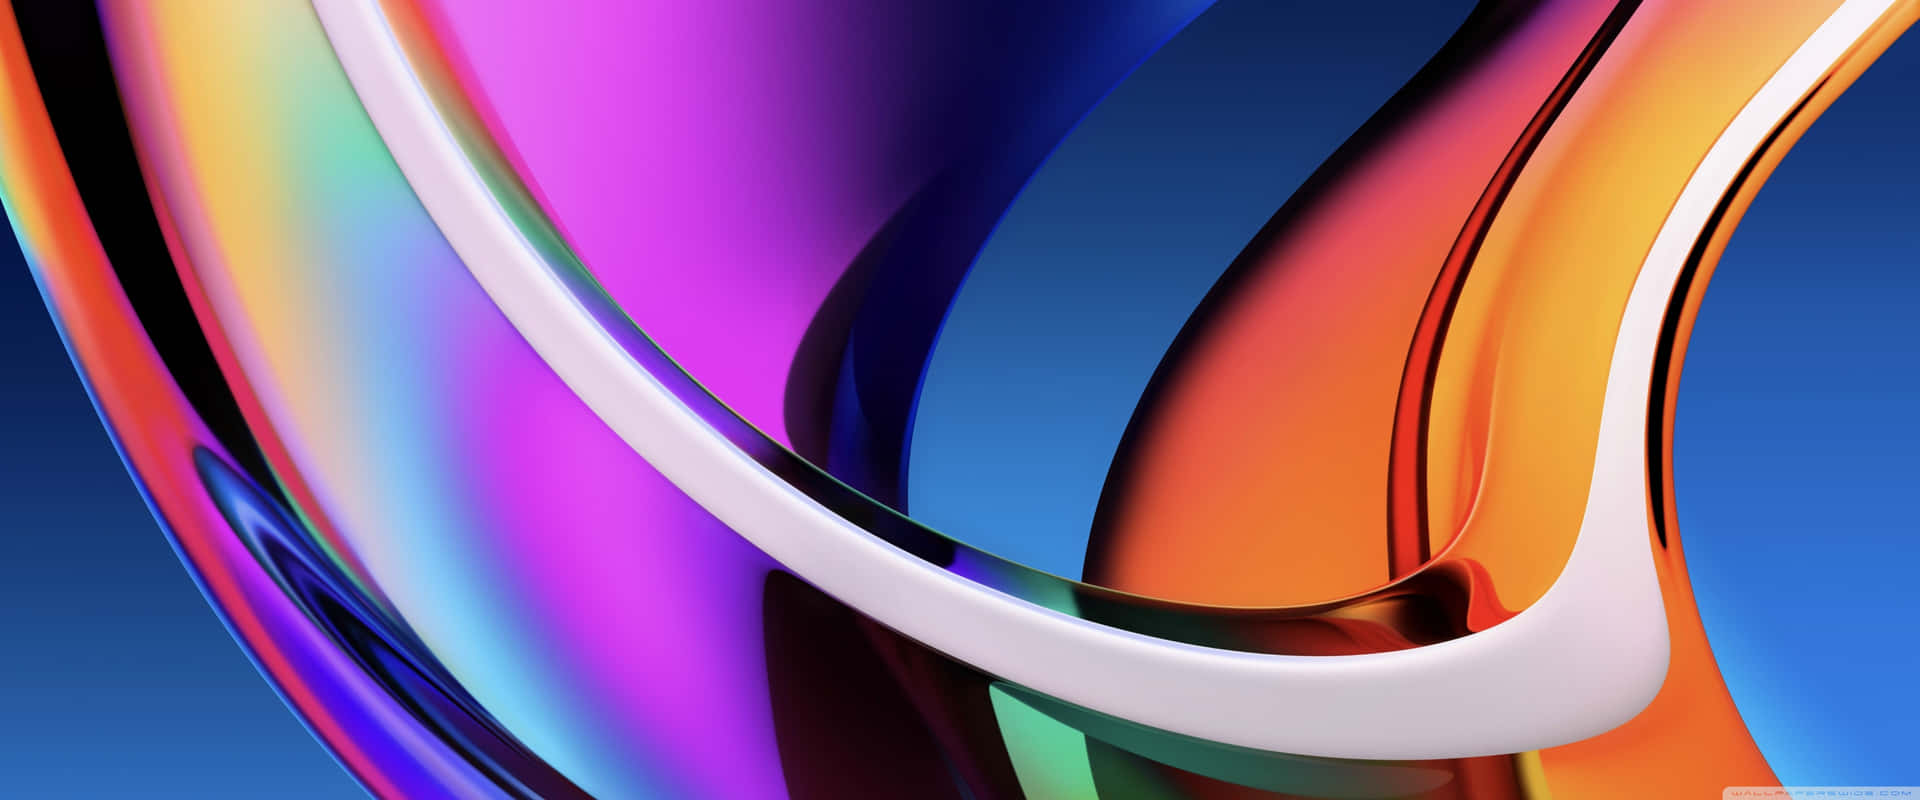 iPhone 12 Pro with a stunning 3840 x 1600 resolution Wallpaper